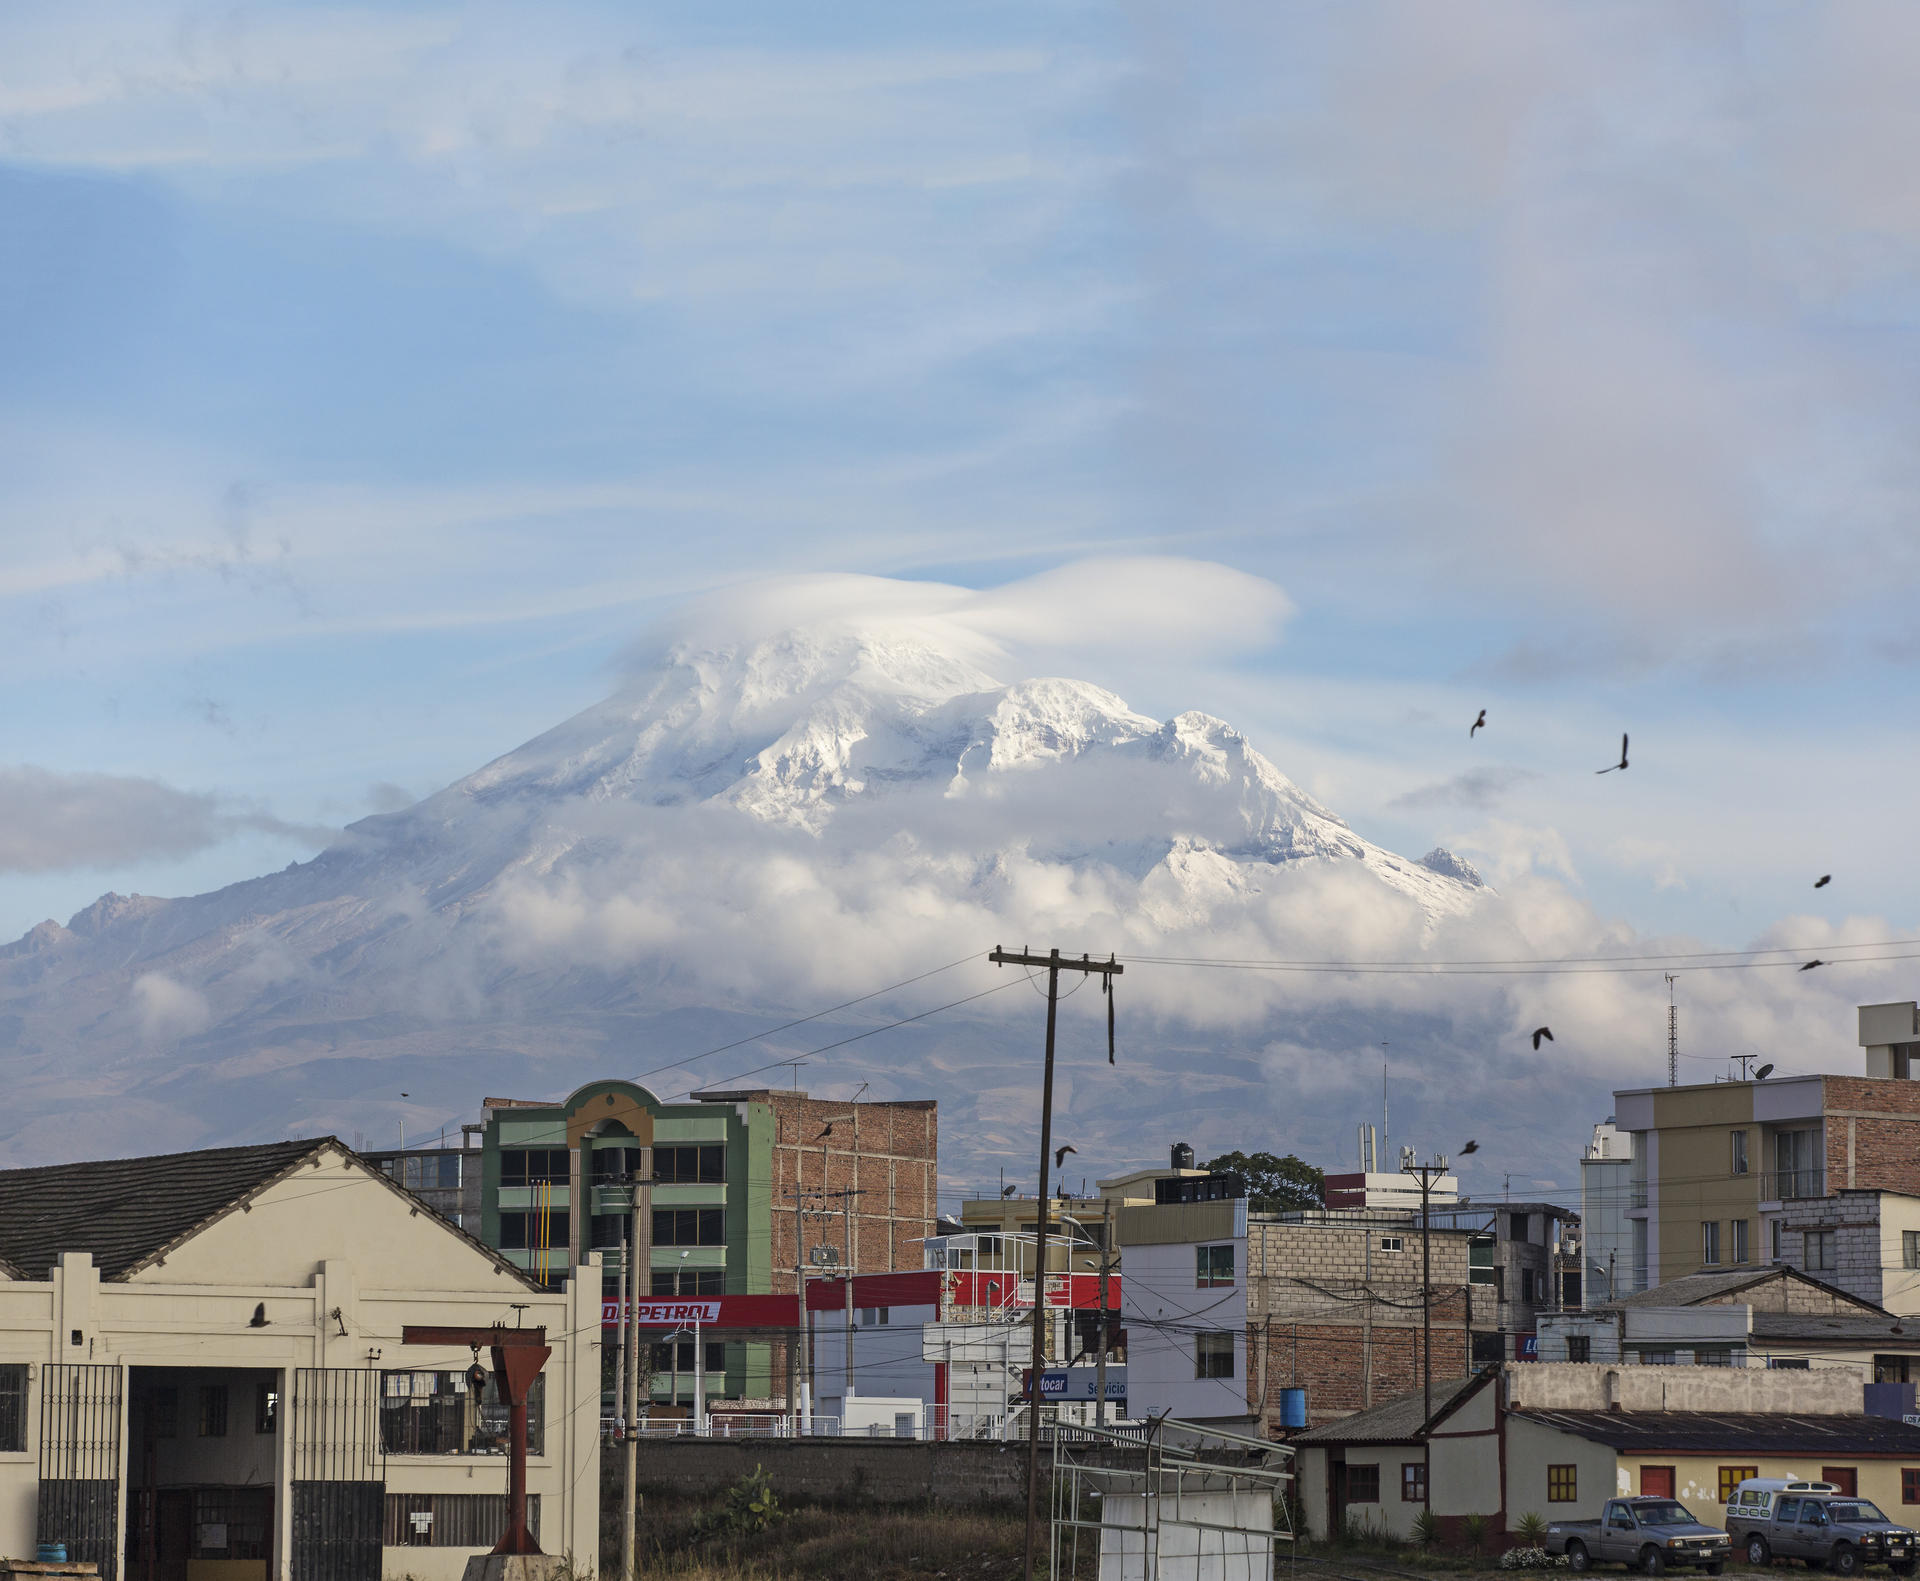 Mount Chimborazo, as seen from the Tren Crucero and across the town of Riobamba.